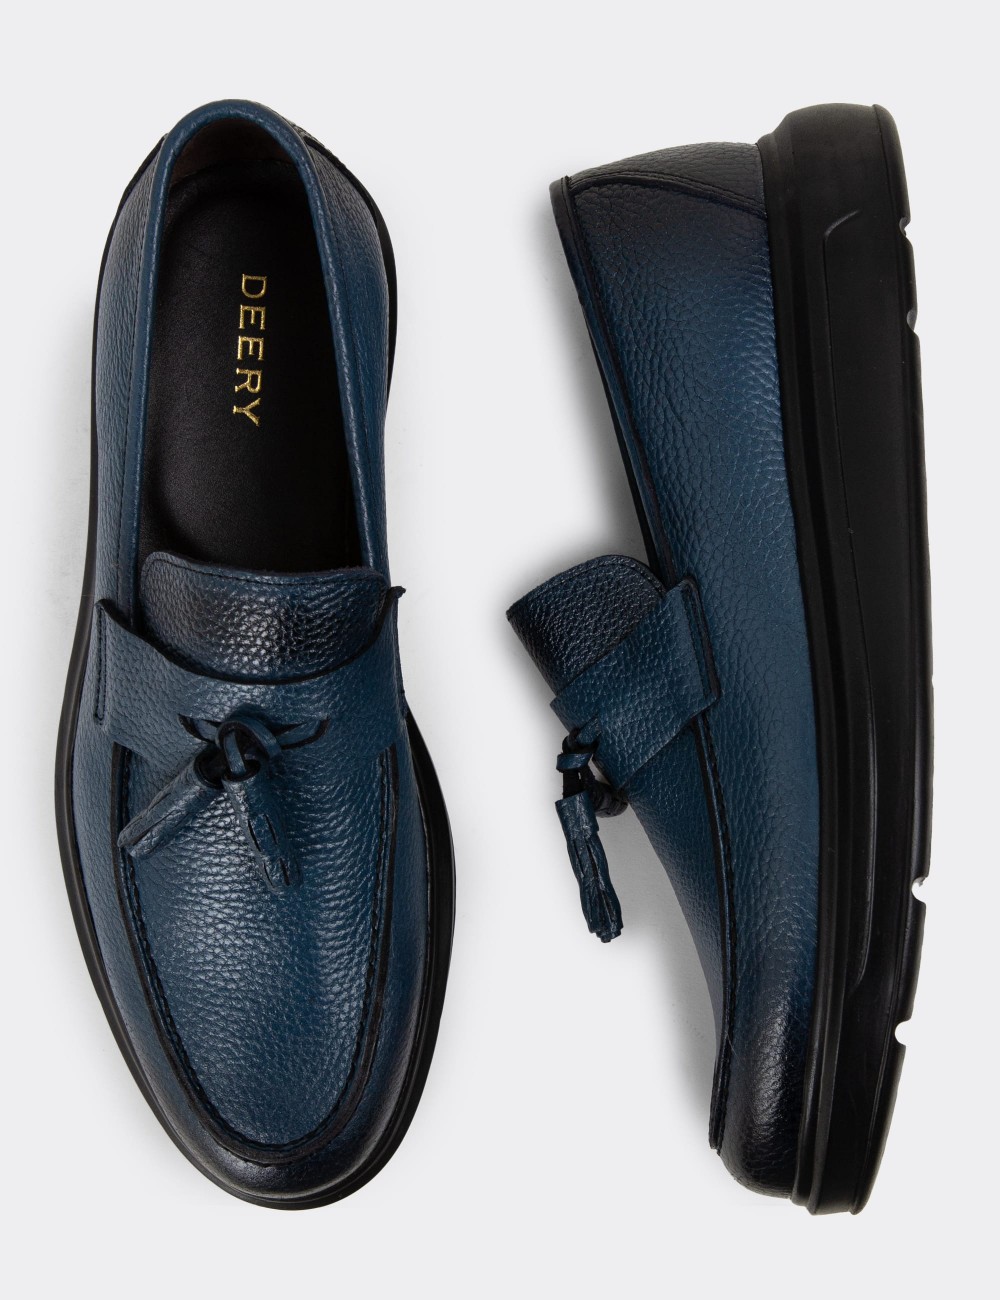 Blue Leather Loafers - 01587MMVIP07